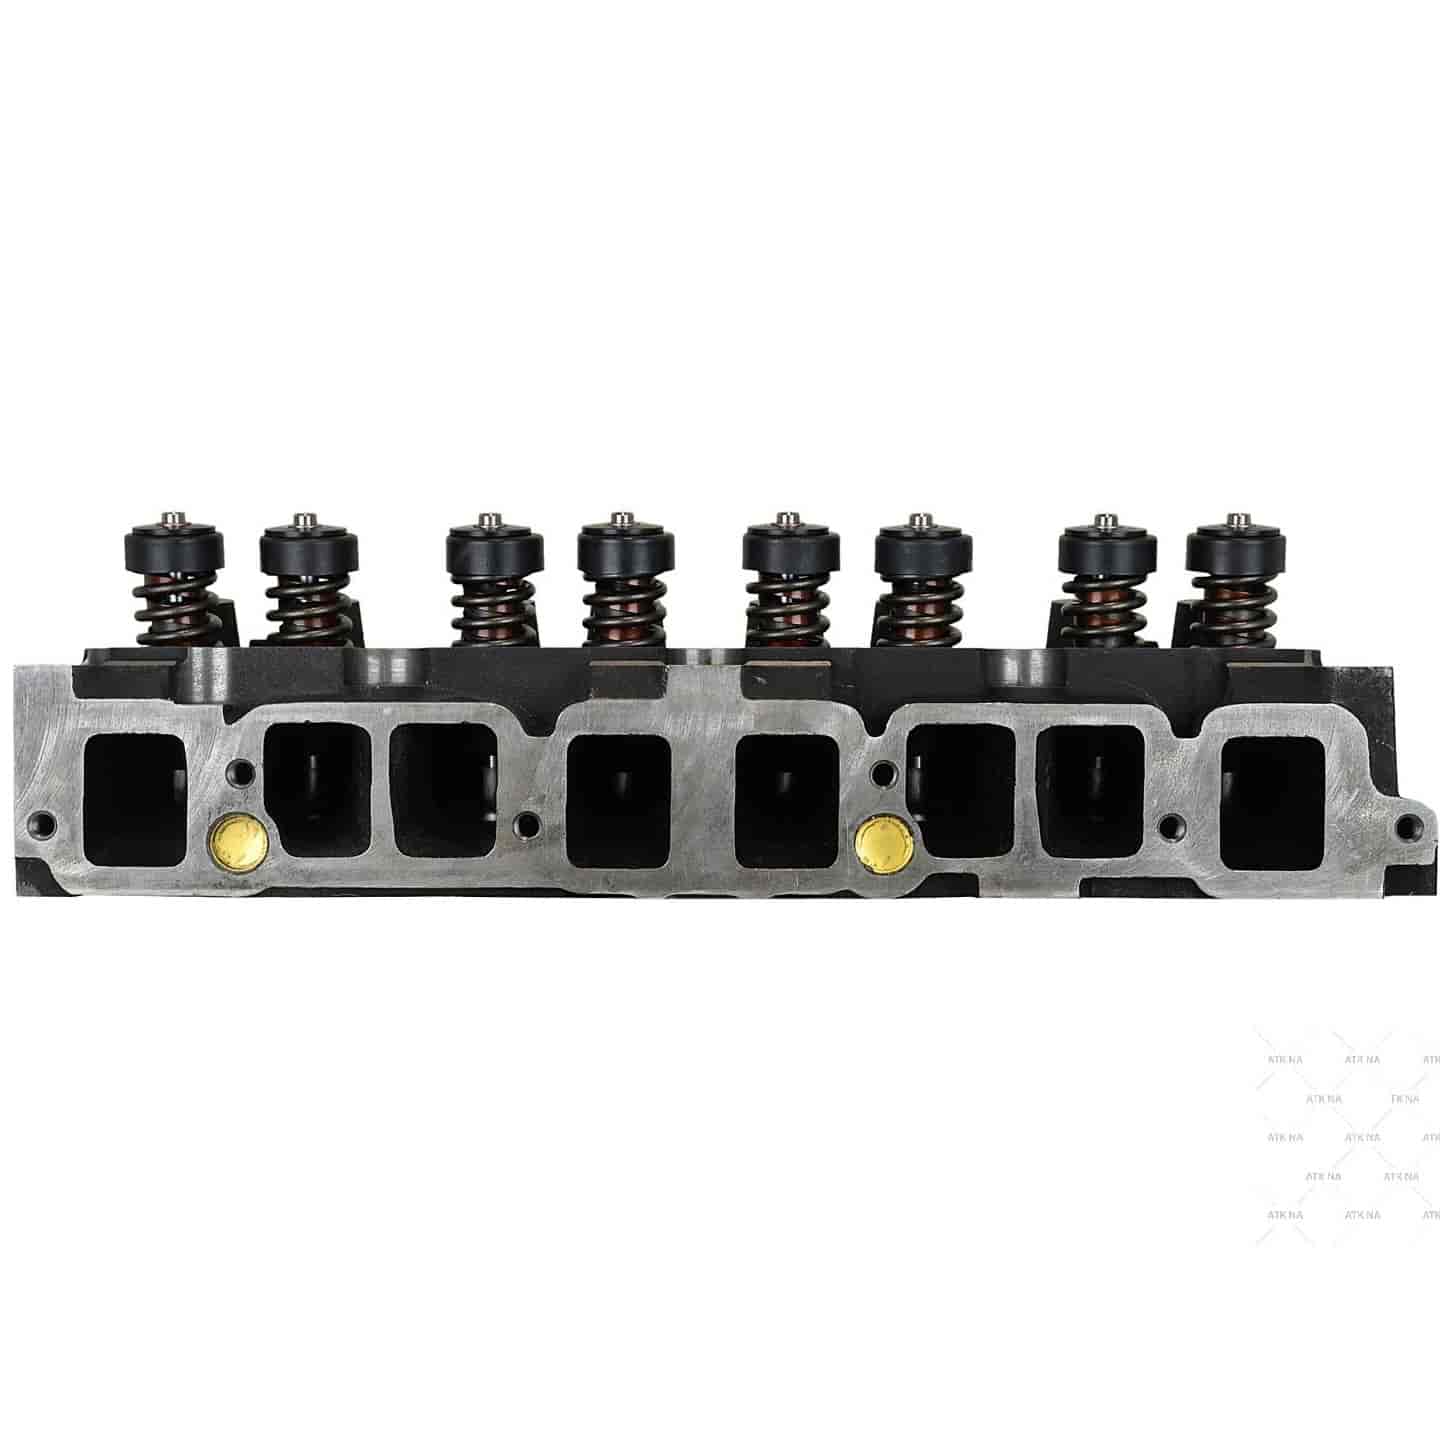 Remanufactured Cylinder Head for 1974-1990 GM Marine Applications